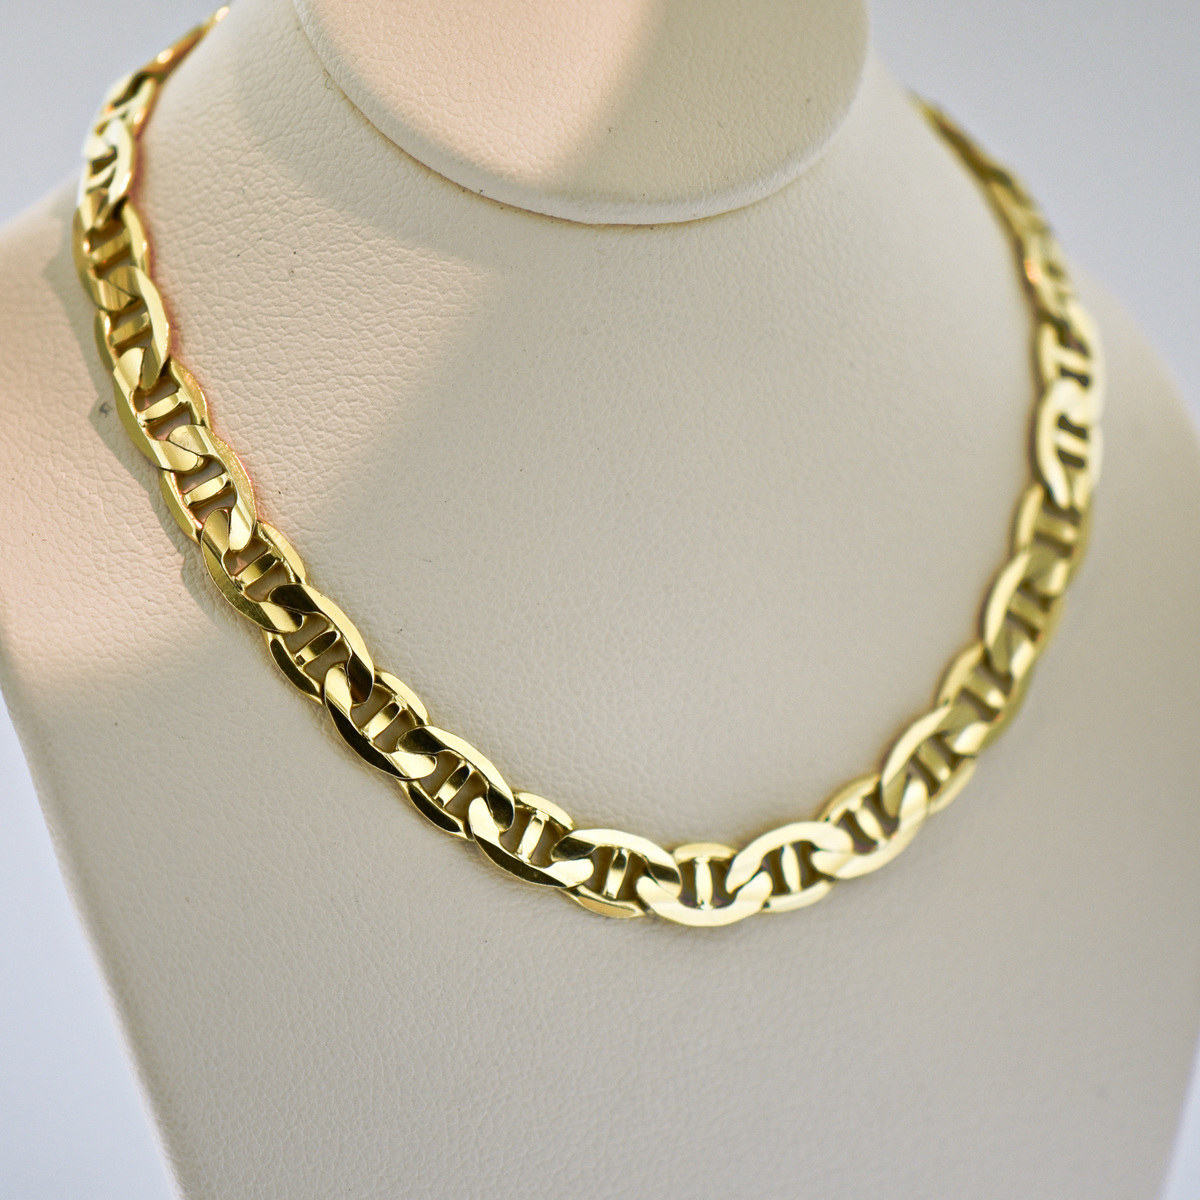 Gold Necklace Stock Photos and Pictures - 254,721 Images | Shutterstock-vachngandaiphat.com.vn